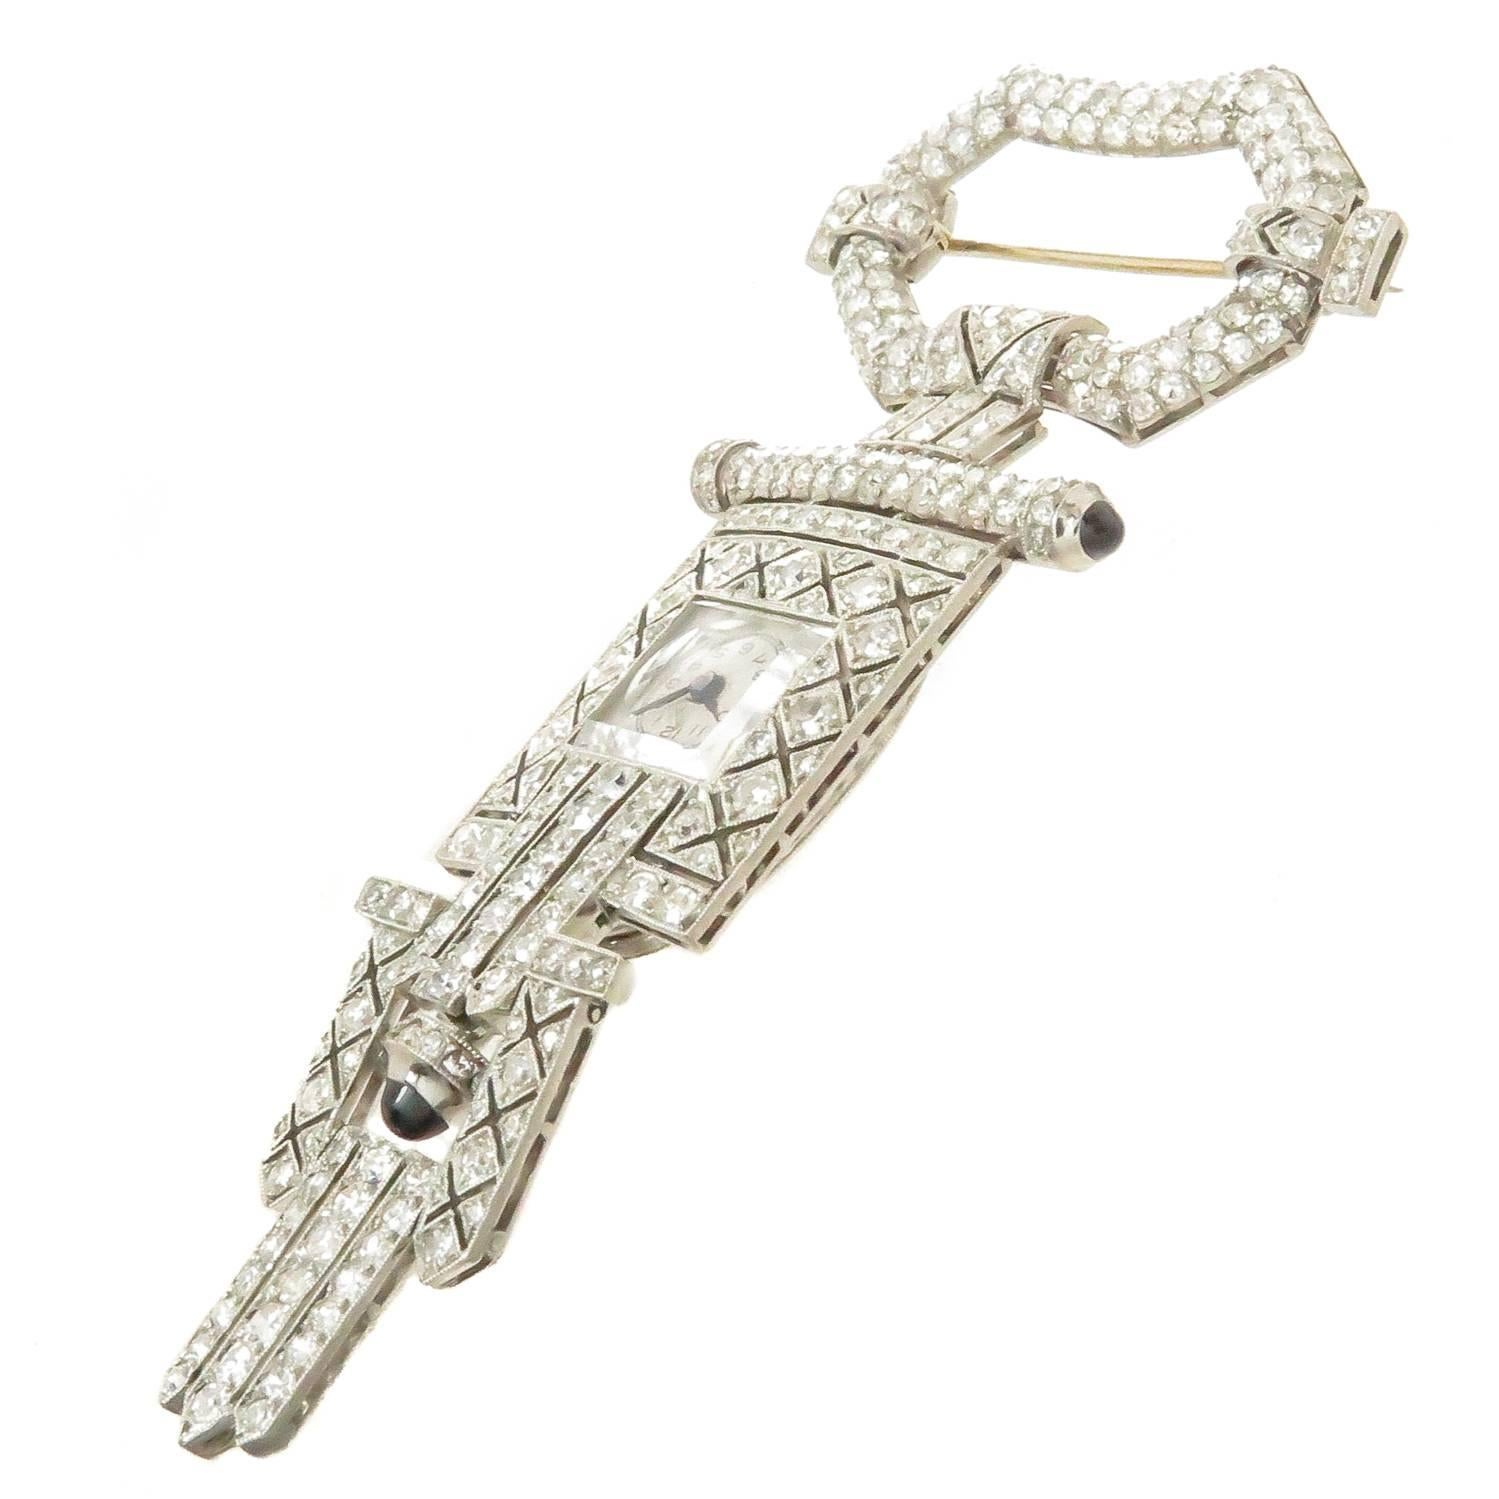 Circa 1930 High Art Deco Style Platinum Lapel Watch. Measuring 3 1/4 inches in length and 1 1/2 inch wide. Each section is flexible and gives this piece great movement, set with single cut Diamonds totaling 4 Carats and further set with Cabochon